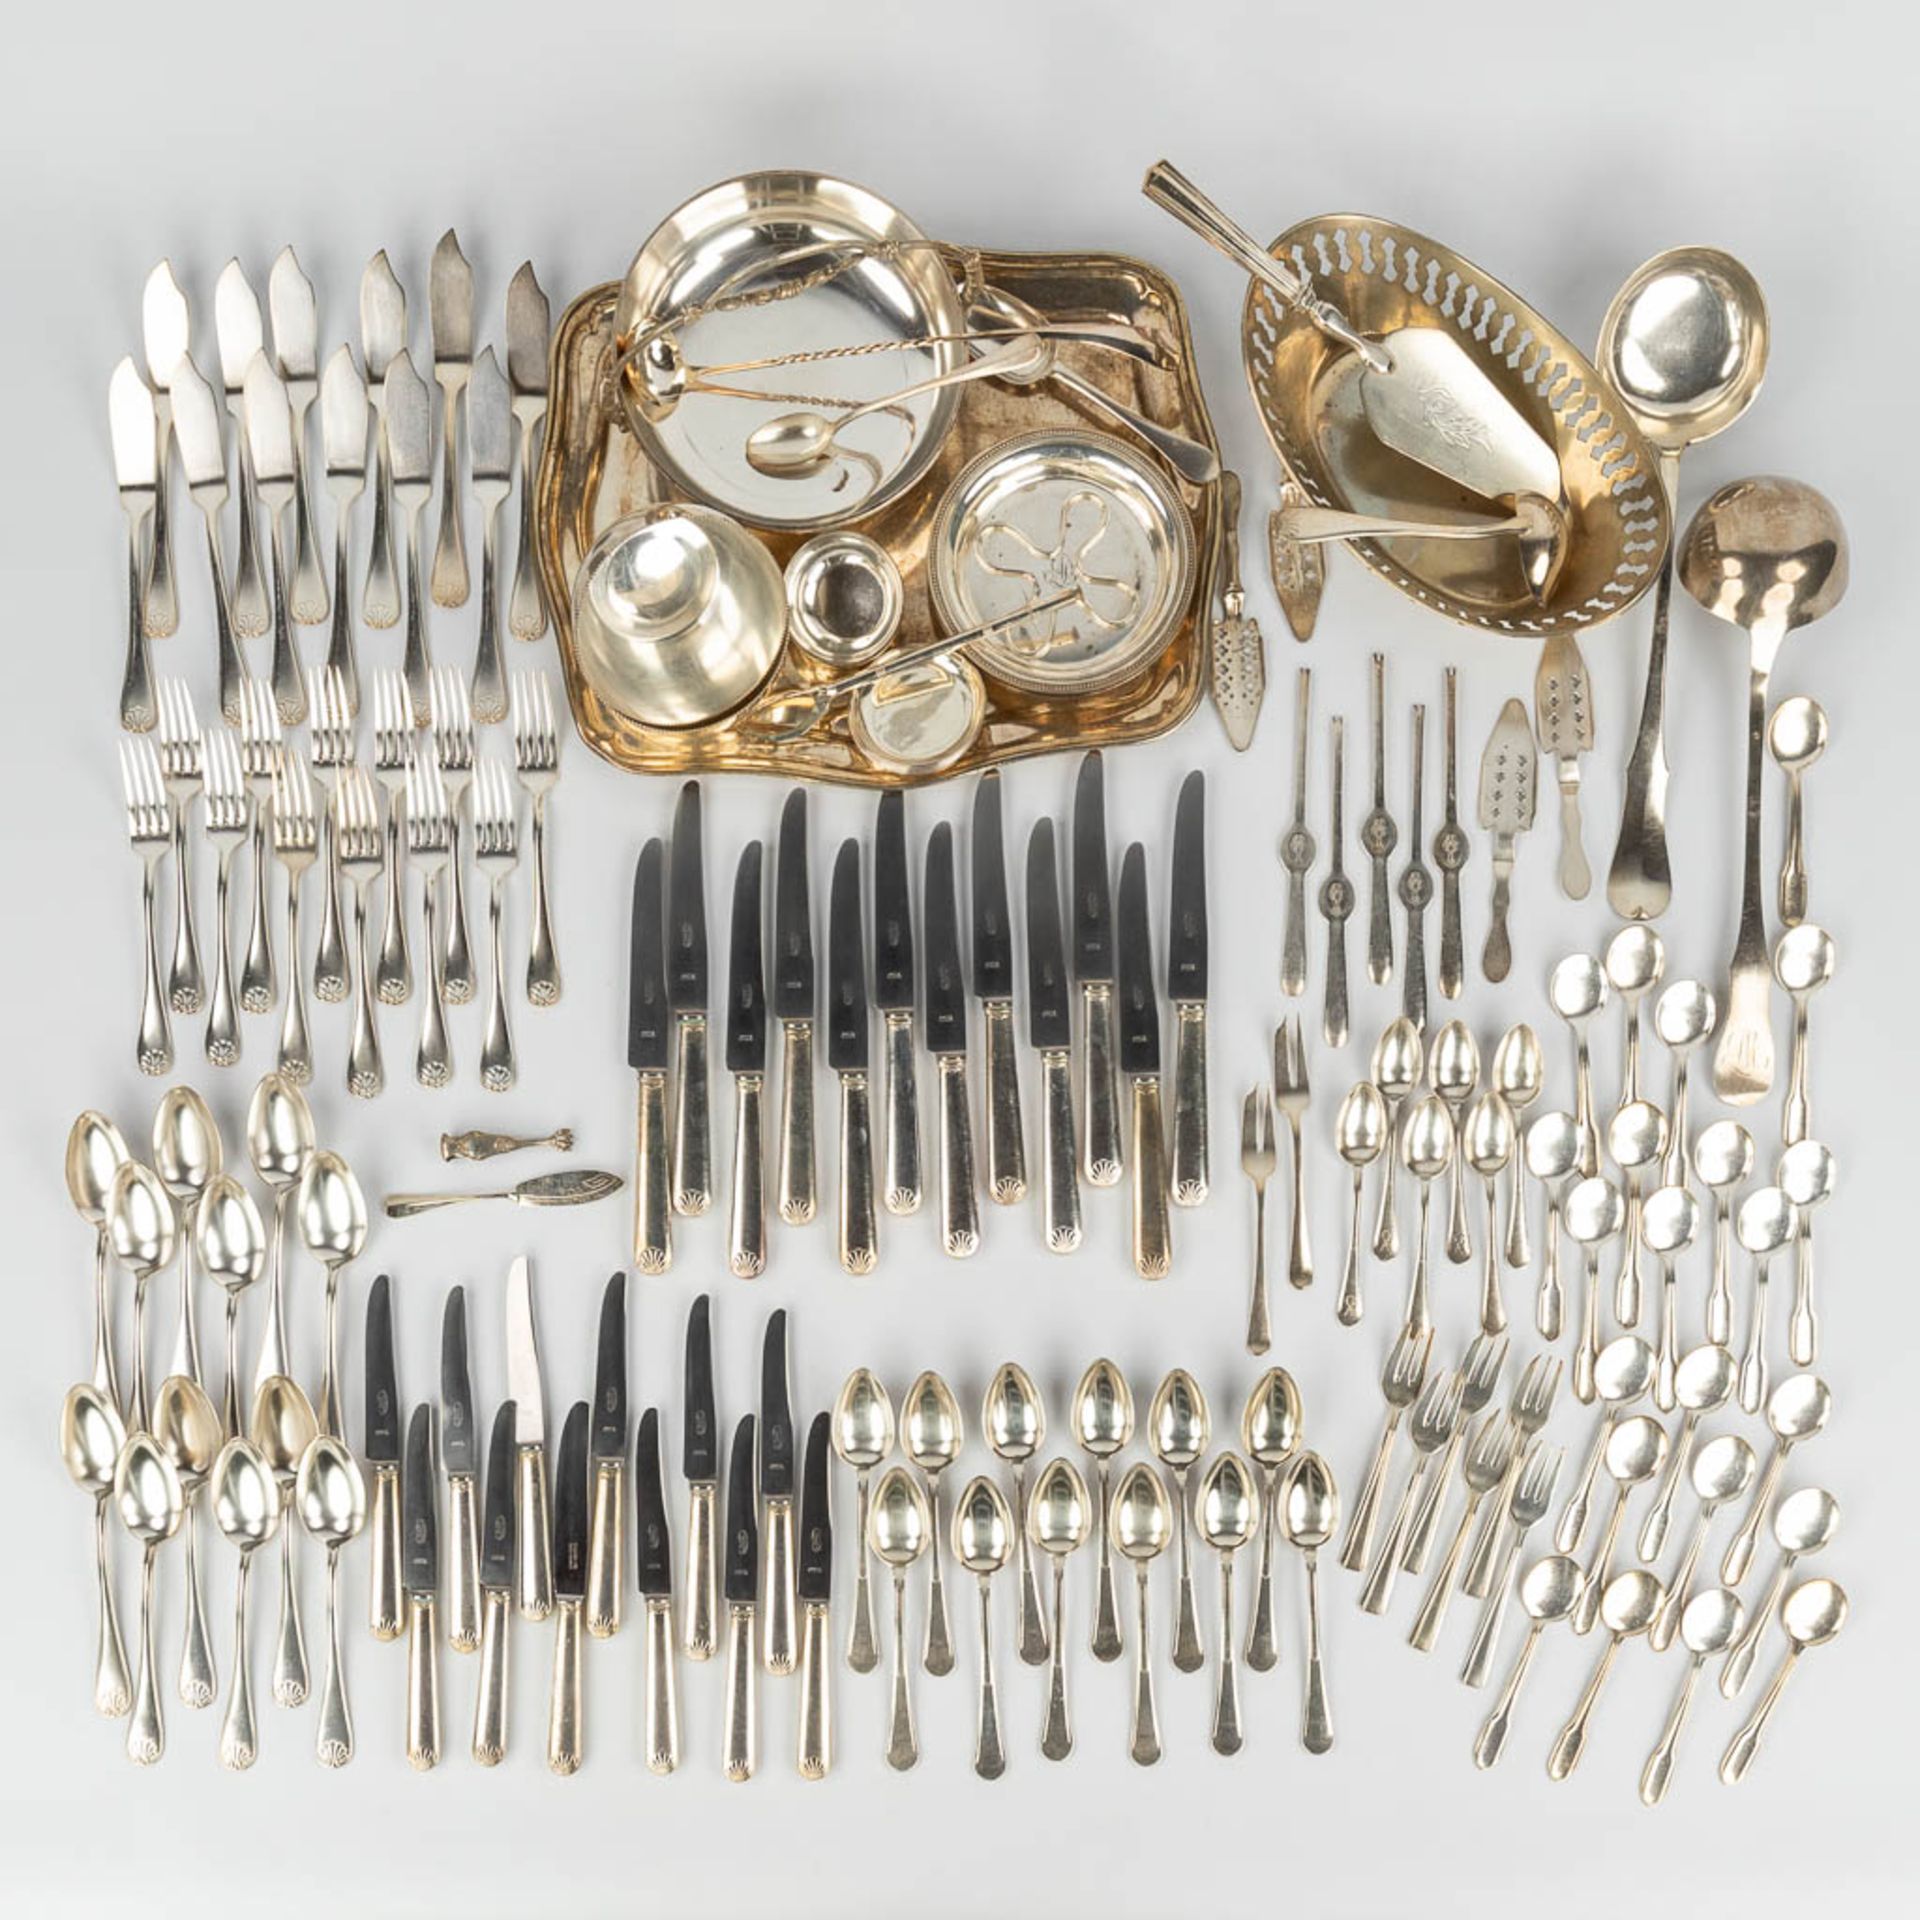 A large collection of cutlery and table accessories made of silver-plated metal.